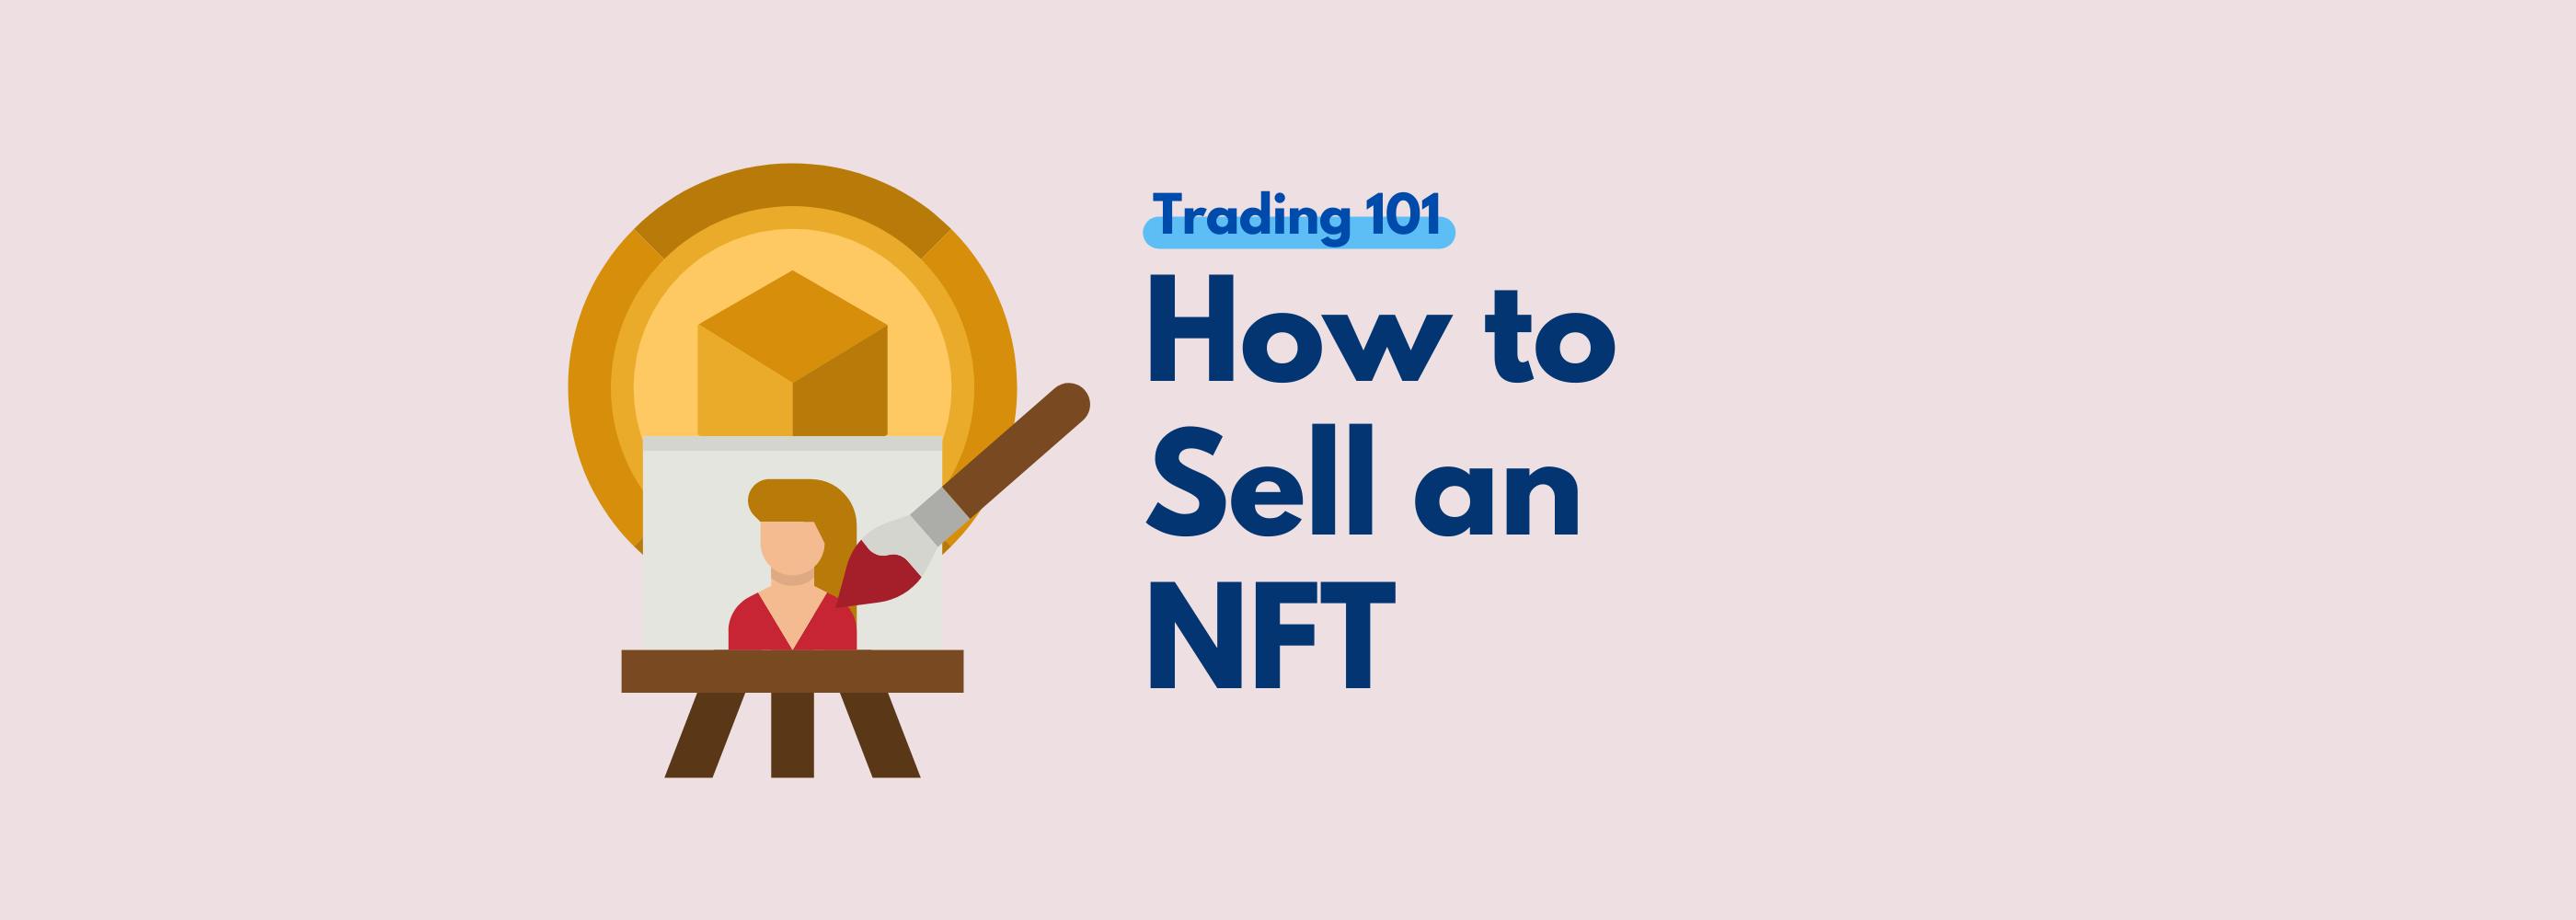 Trading 101: How to sell your first NFT